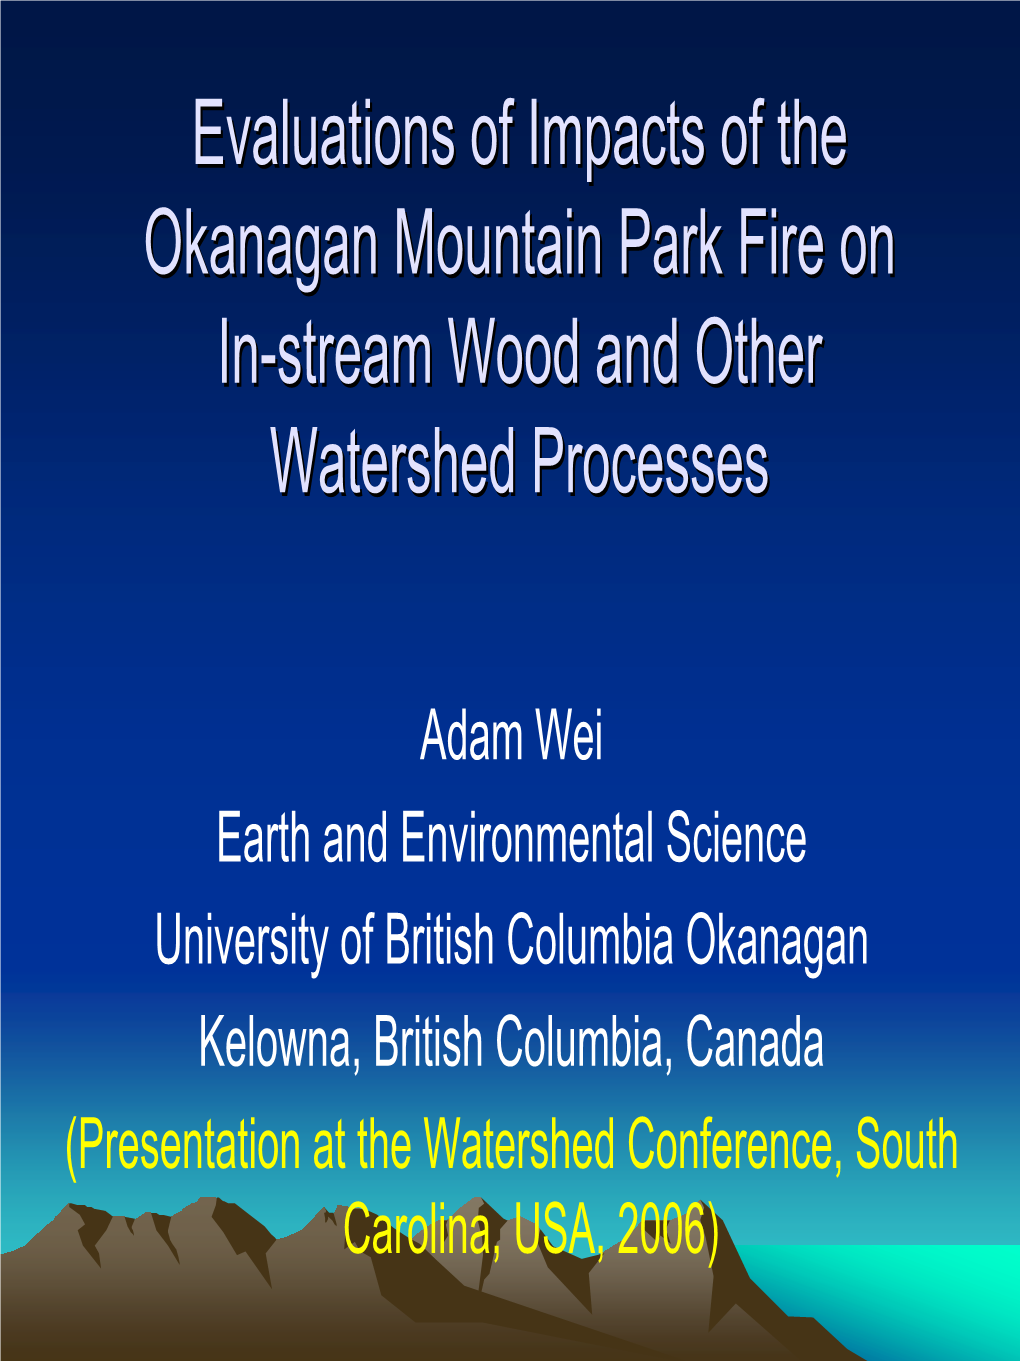 Monitoring Impacts of the Okanagan Mountain Park Fire on Hydrological